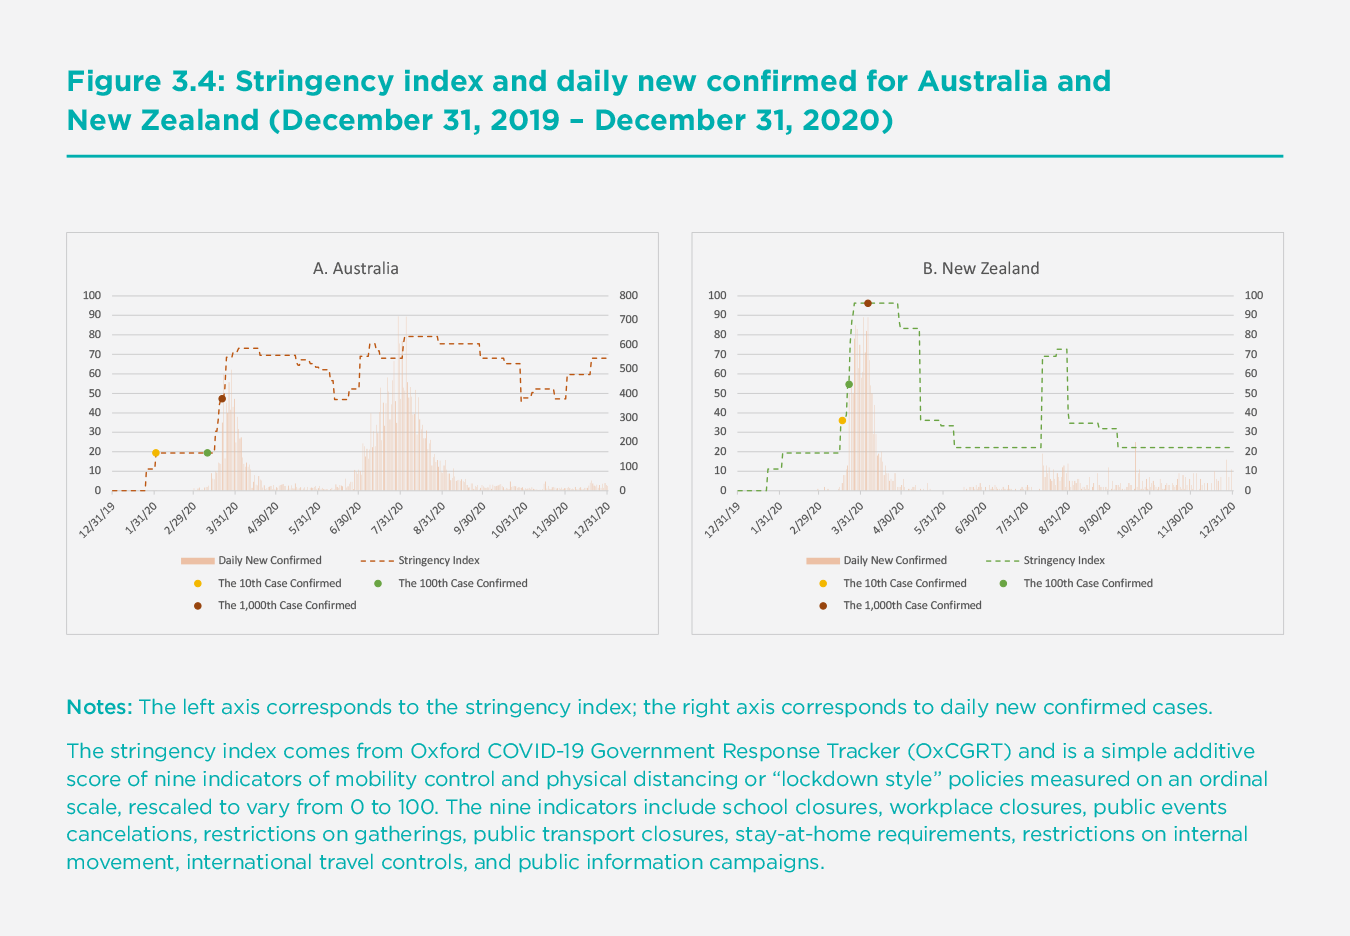  Figure 3.4: Stringency index and daily new confirmed for Australia and New Zealand (December 31, 2019 – December 31, 2020)